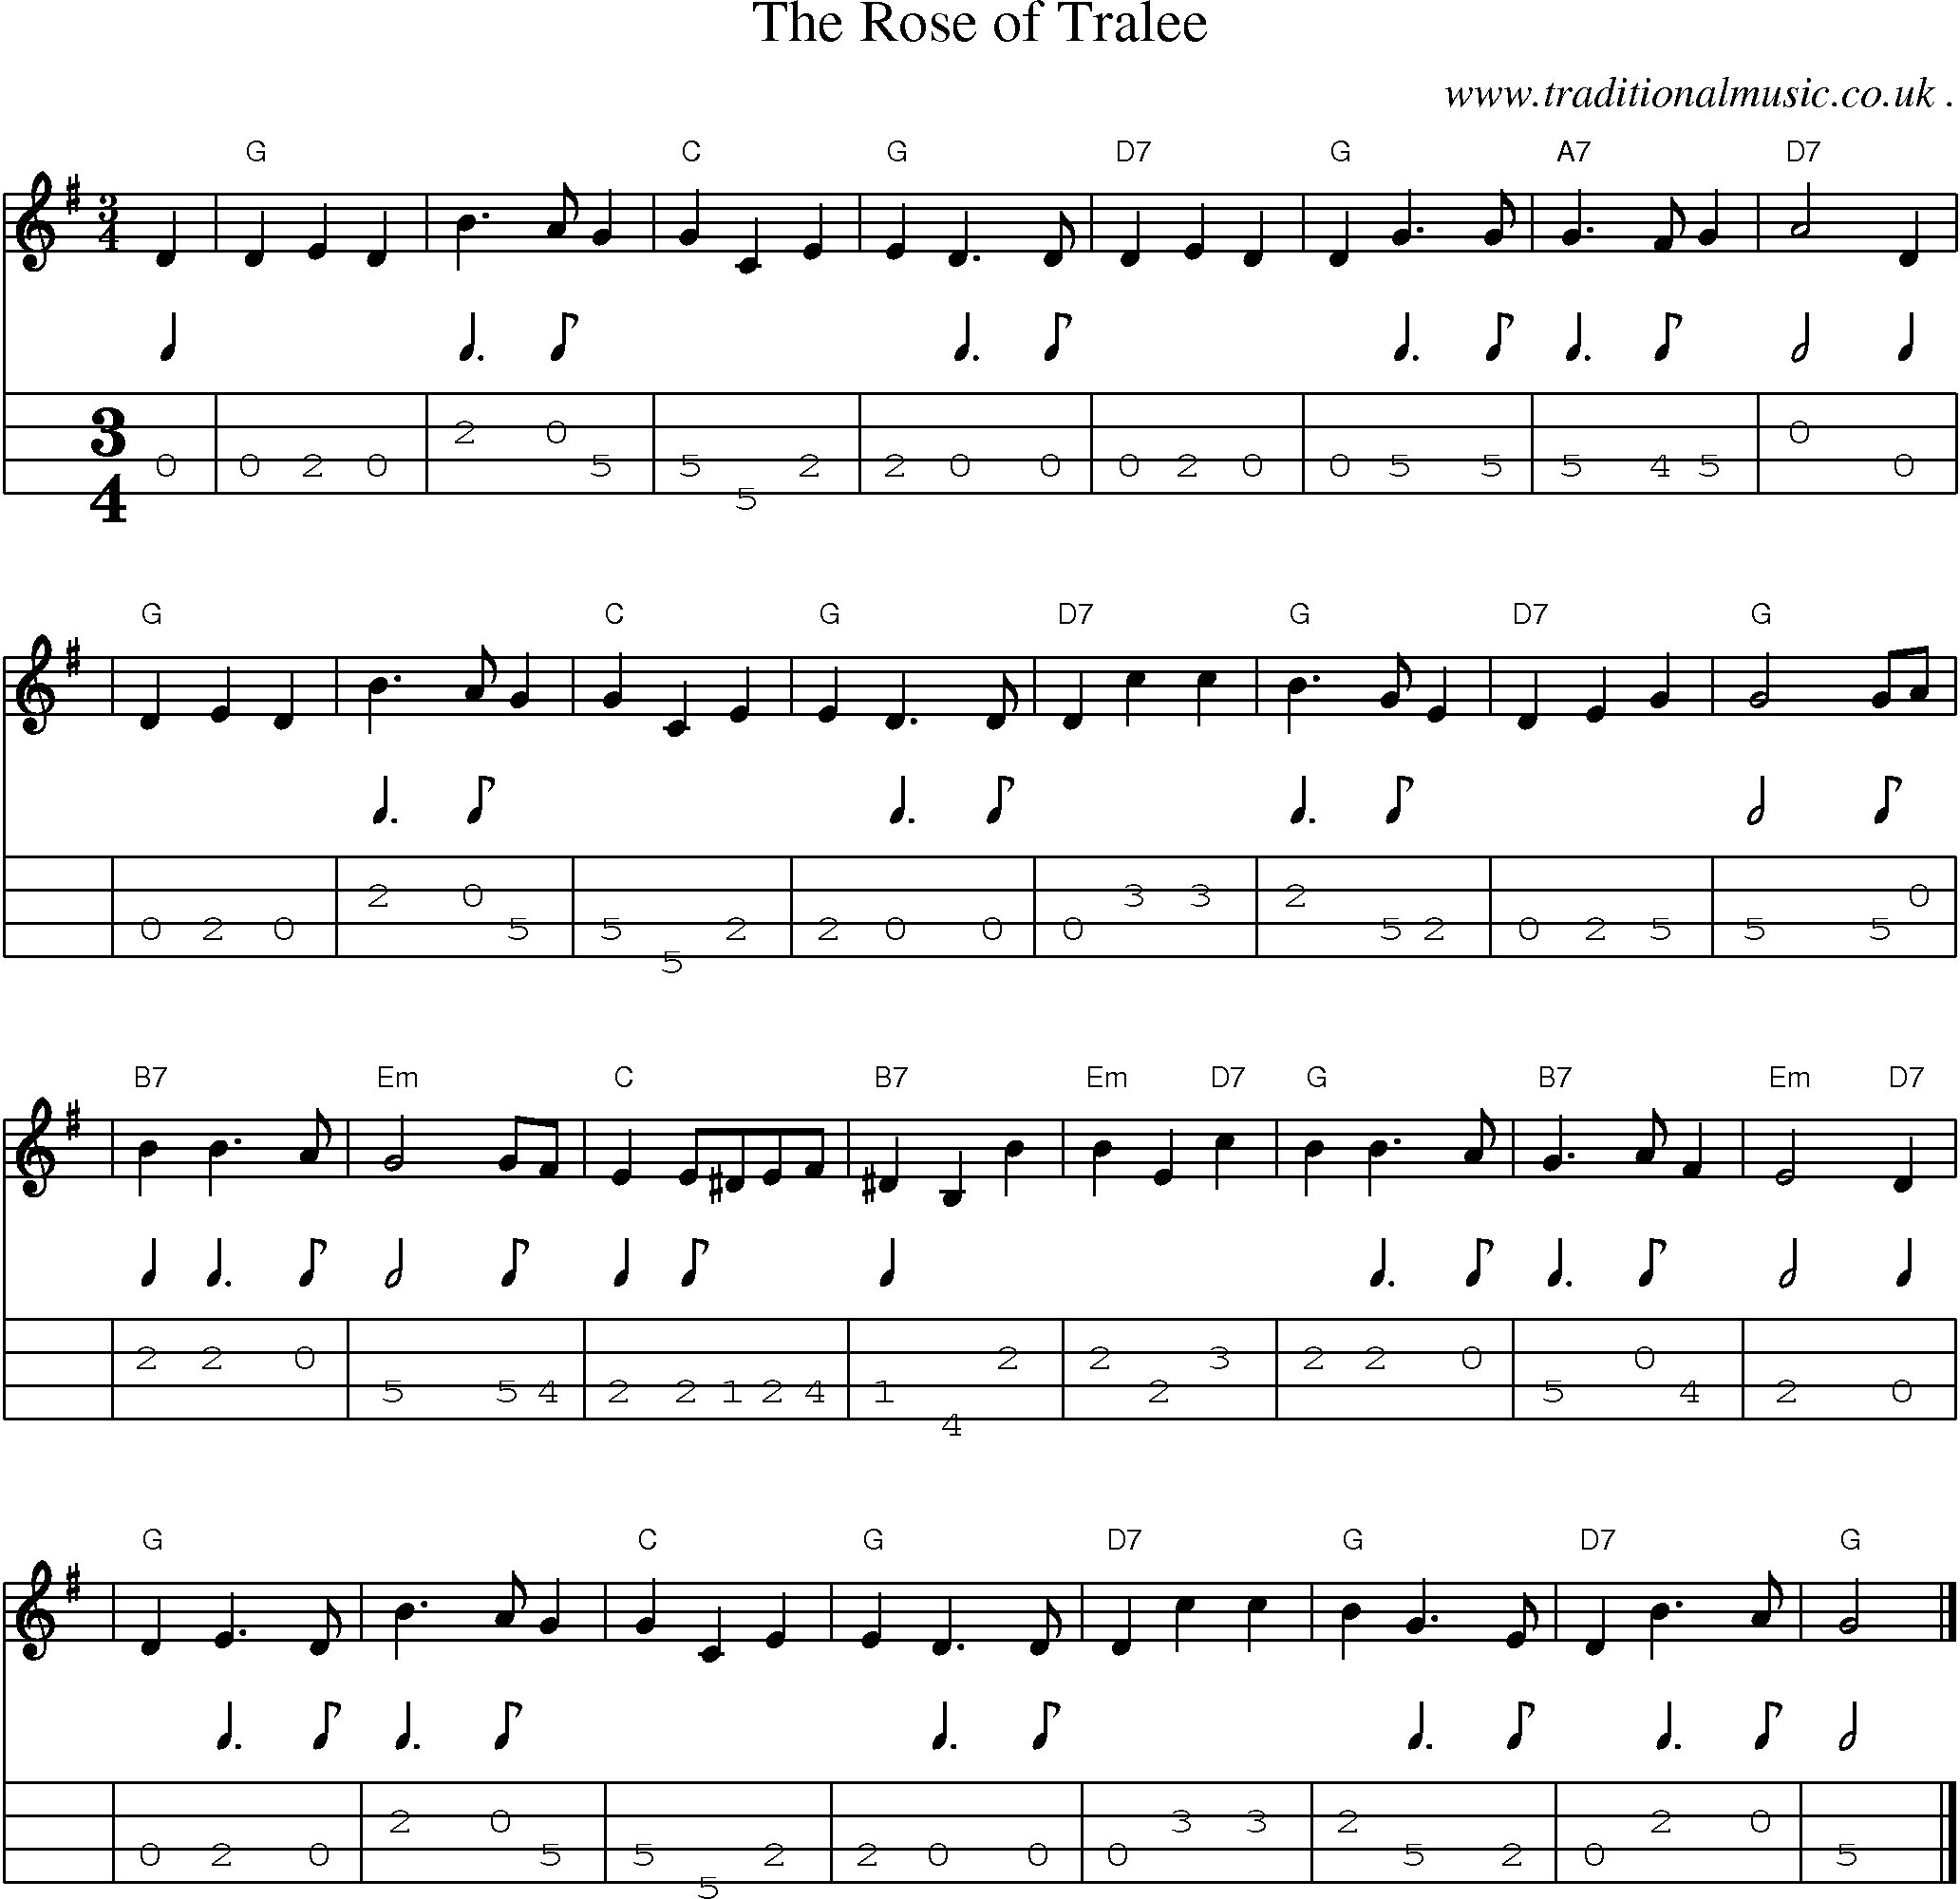 Sheet-music  score, Chords and Mandolin Tabs for The Rose Of Tralee